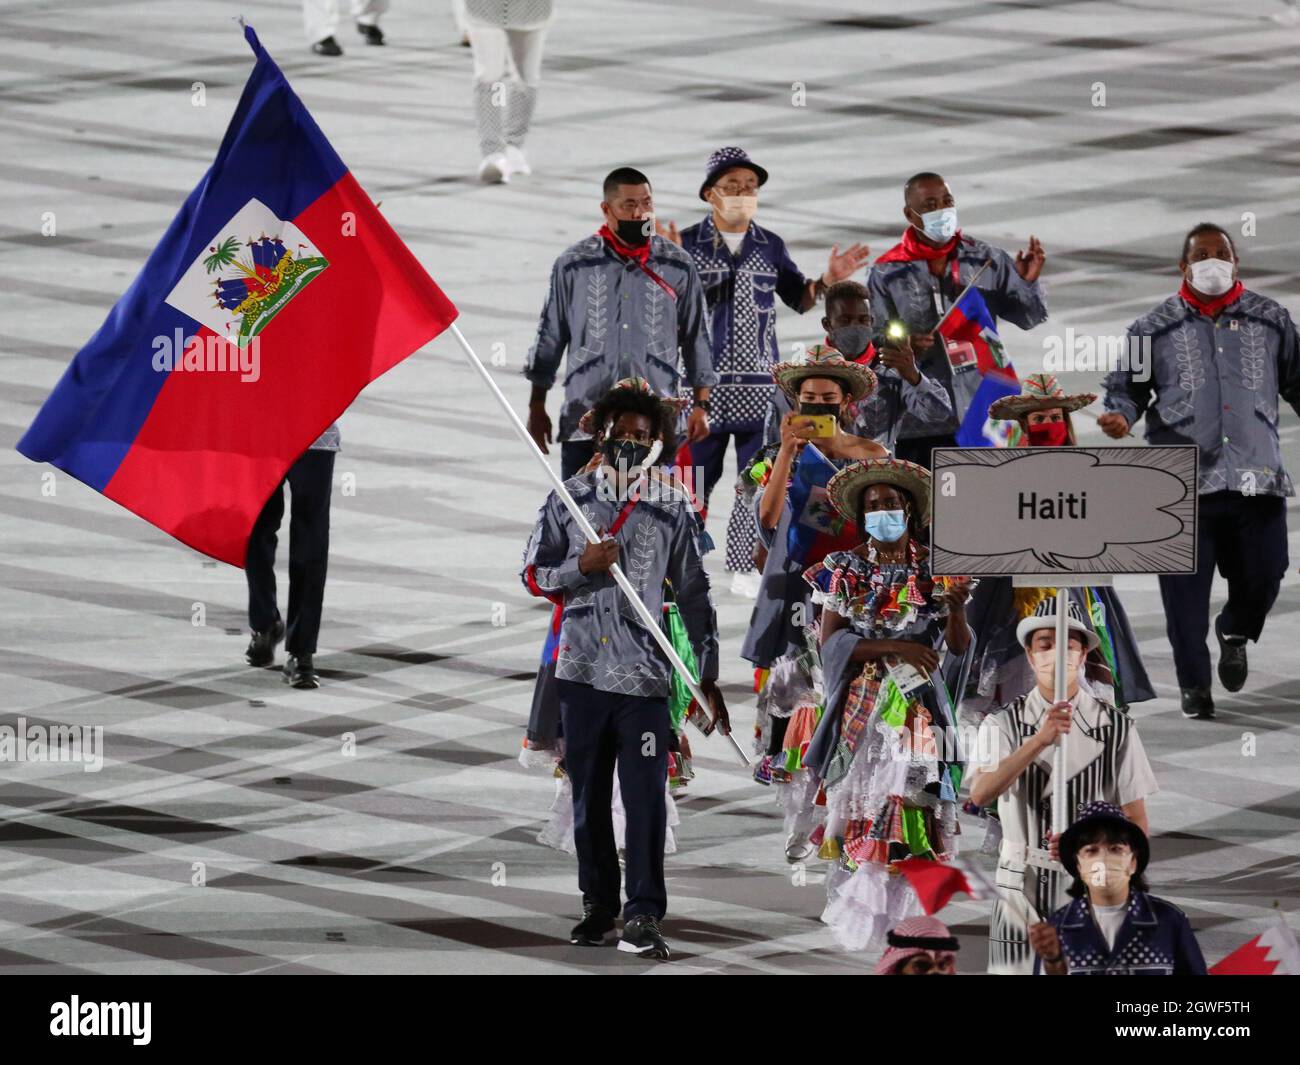 JULY 23rd, 2021 - TOKYO, JAPAN: Haiti's flag bearers Sabiana Anestor and Darrelle Valsaint enter the Olympic Stadium with their delegation during the Stock Photo